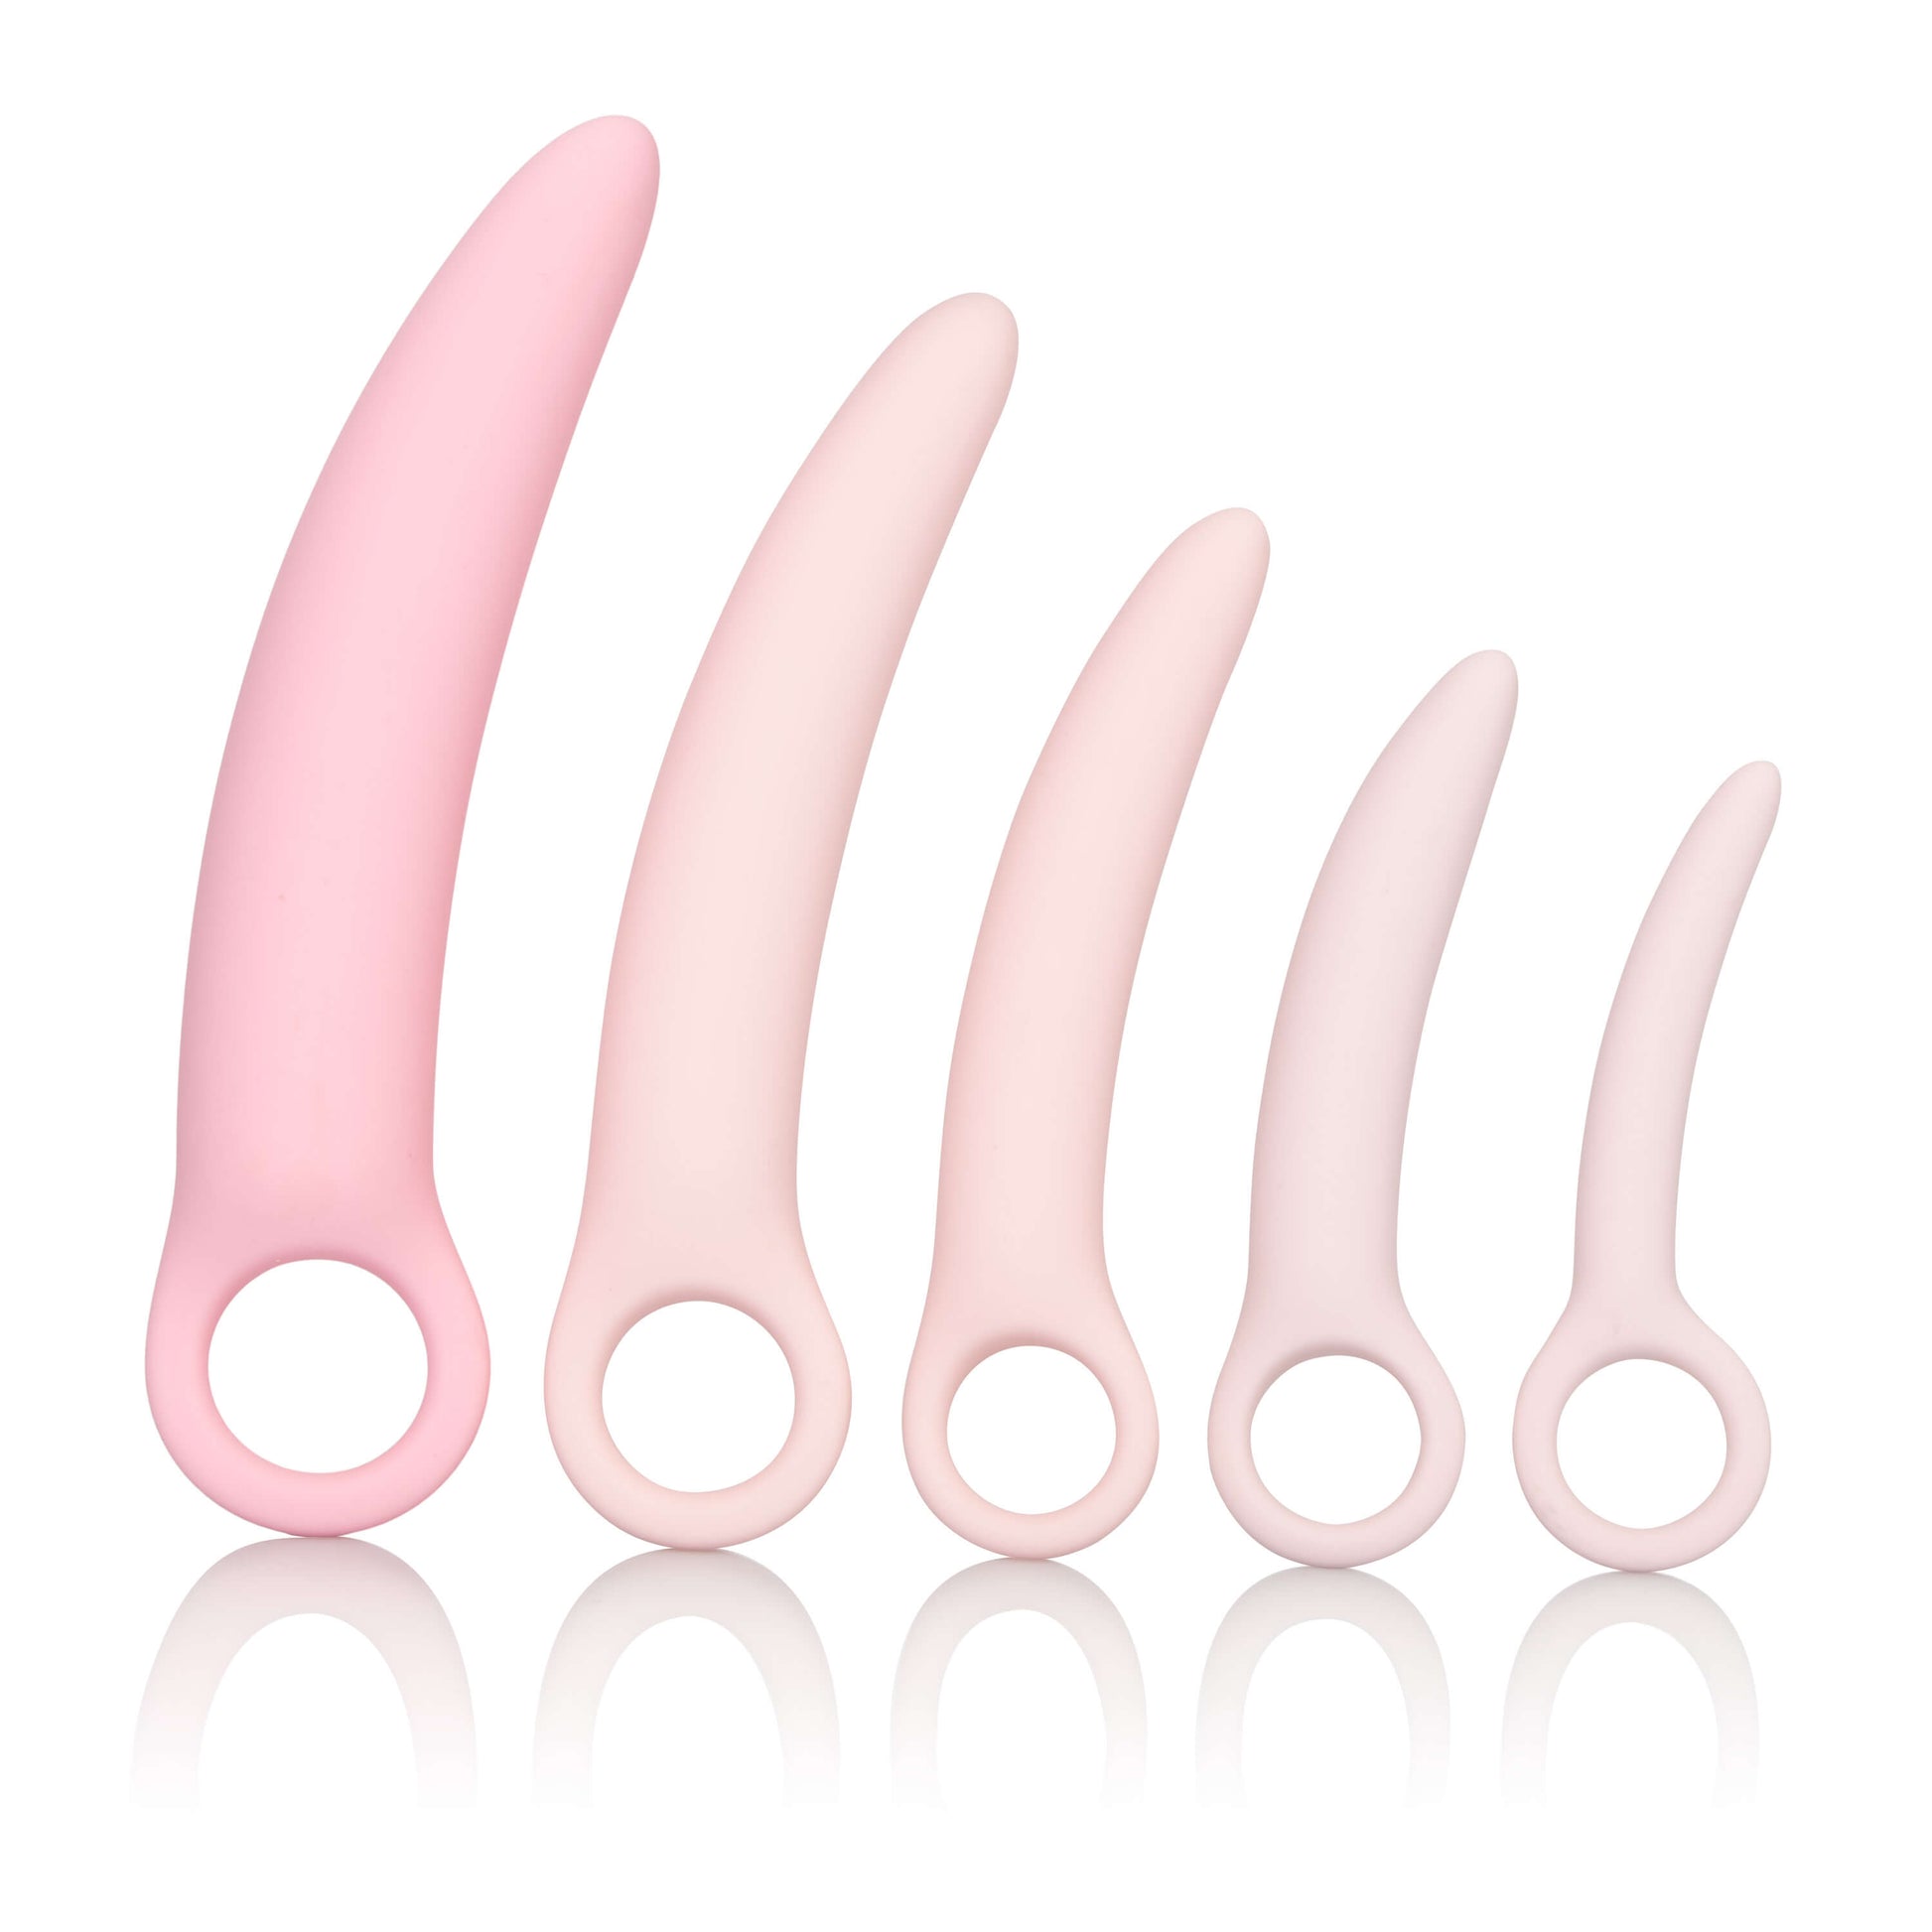 Inspire Silicone Dilator 5-piece Kit - The Bigger O - online sex toy shop USA, Canada & UK shipping available